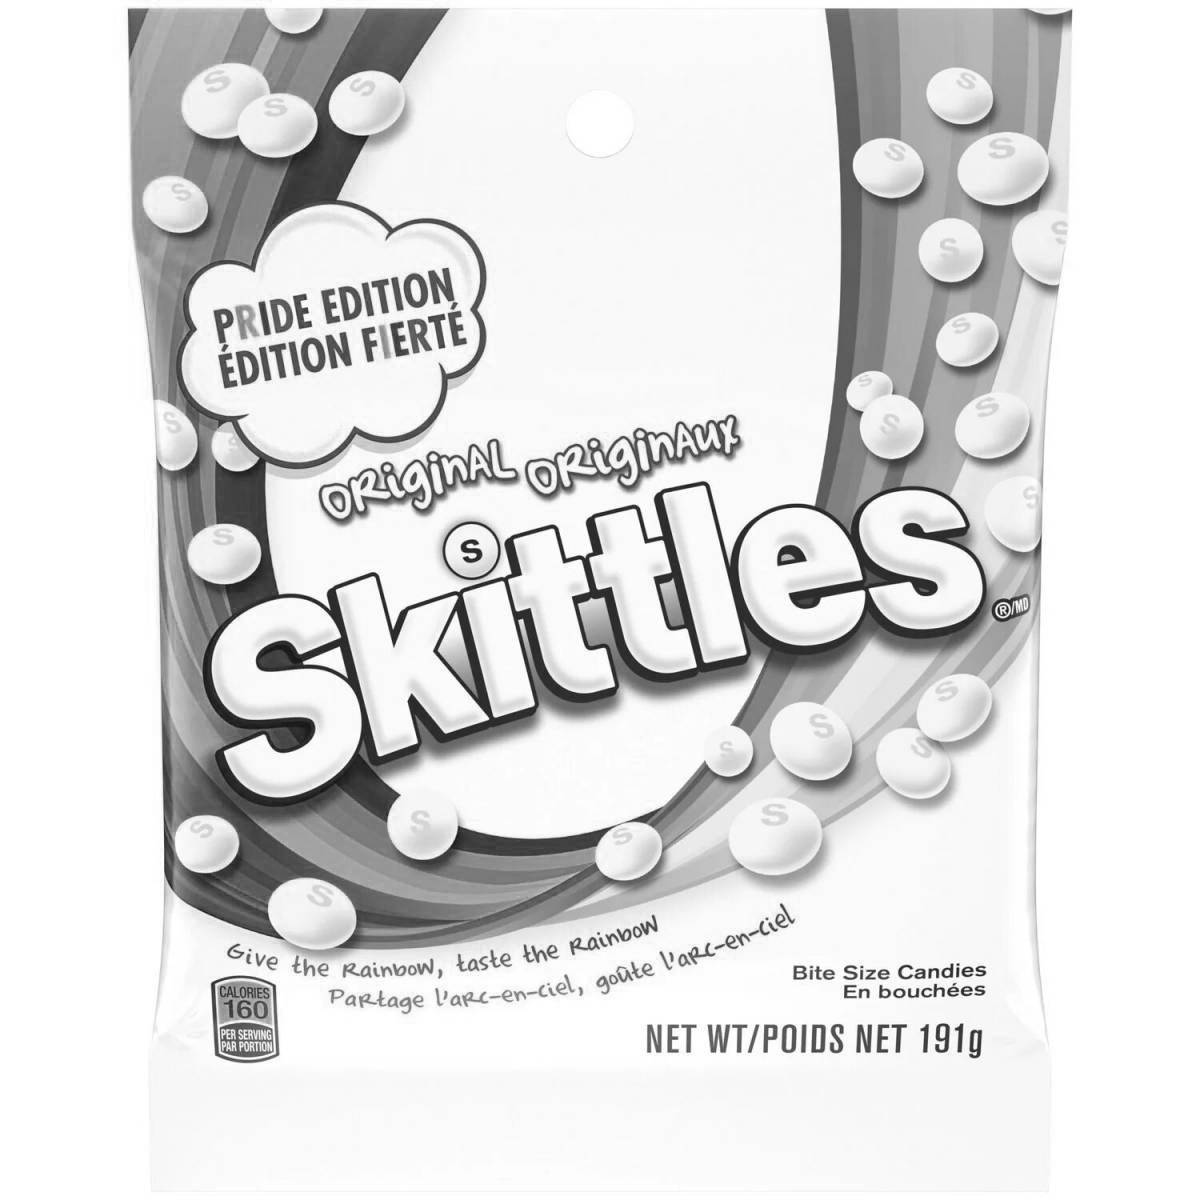 Bright coloring for skittles